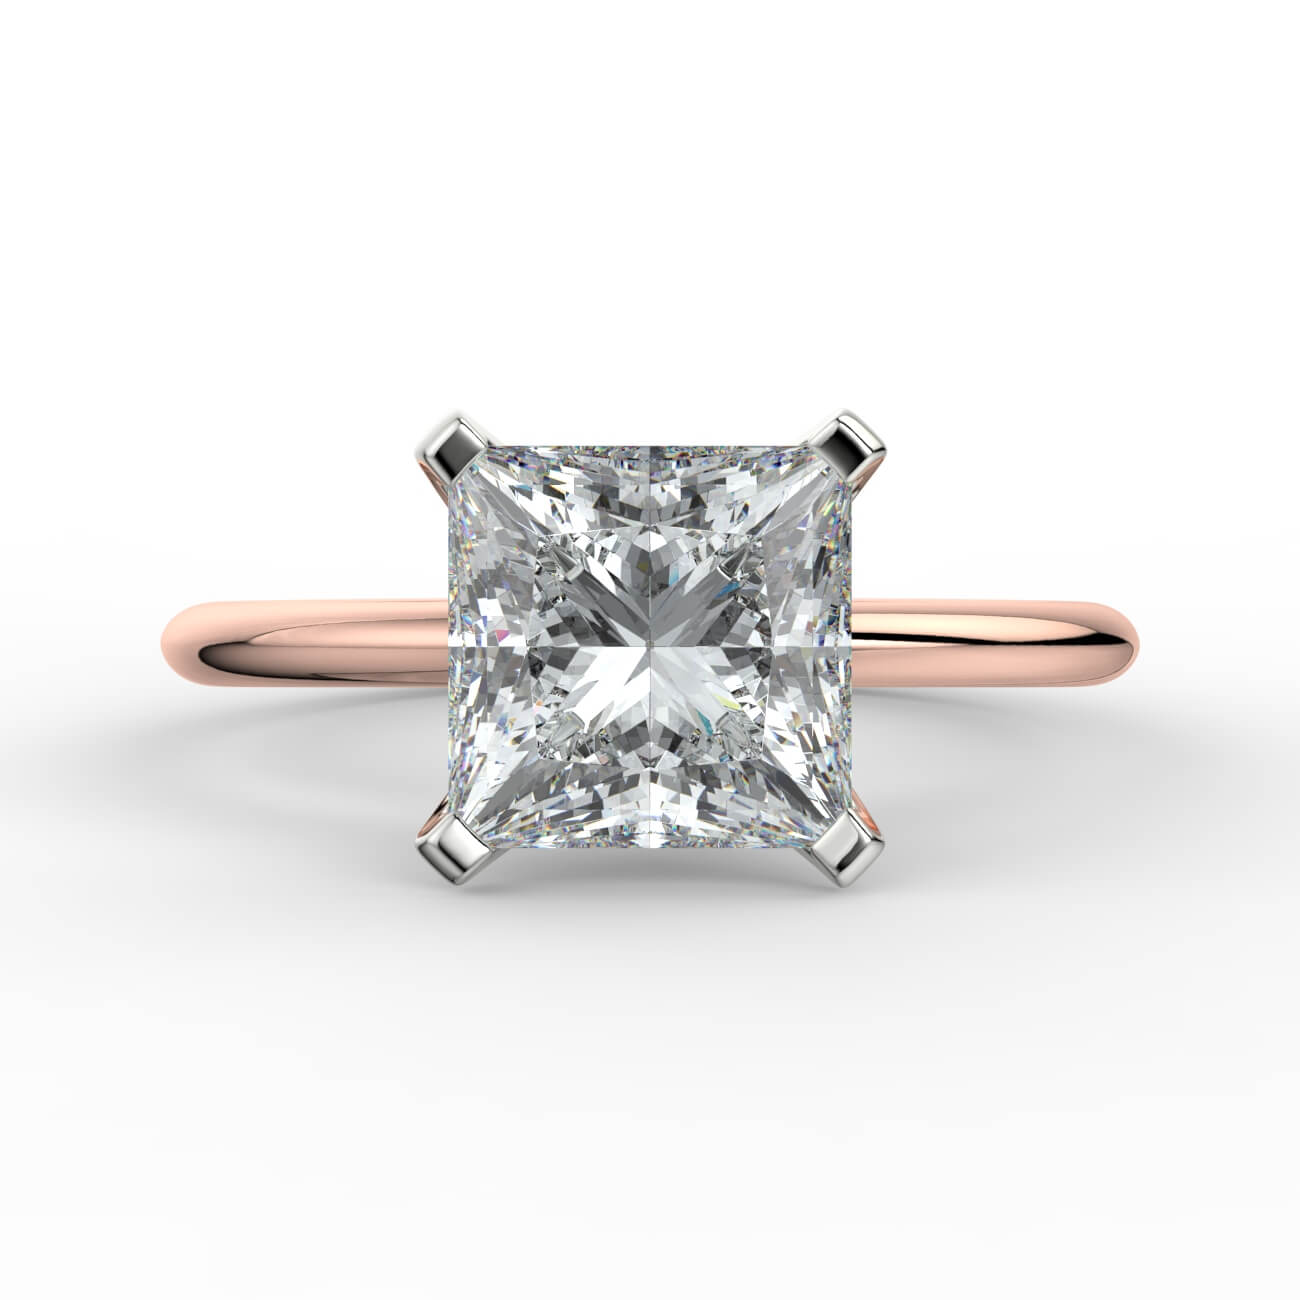 Knife-edge solitaire princess cut diamond engagement ring in rose and white gold – Australian Diamond Network